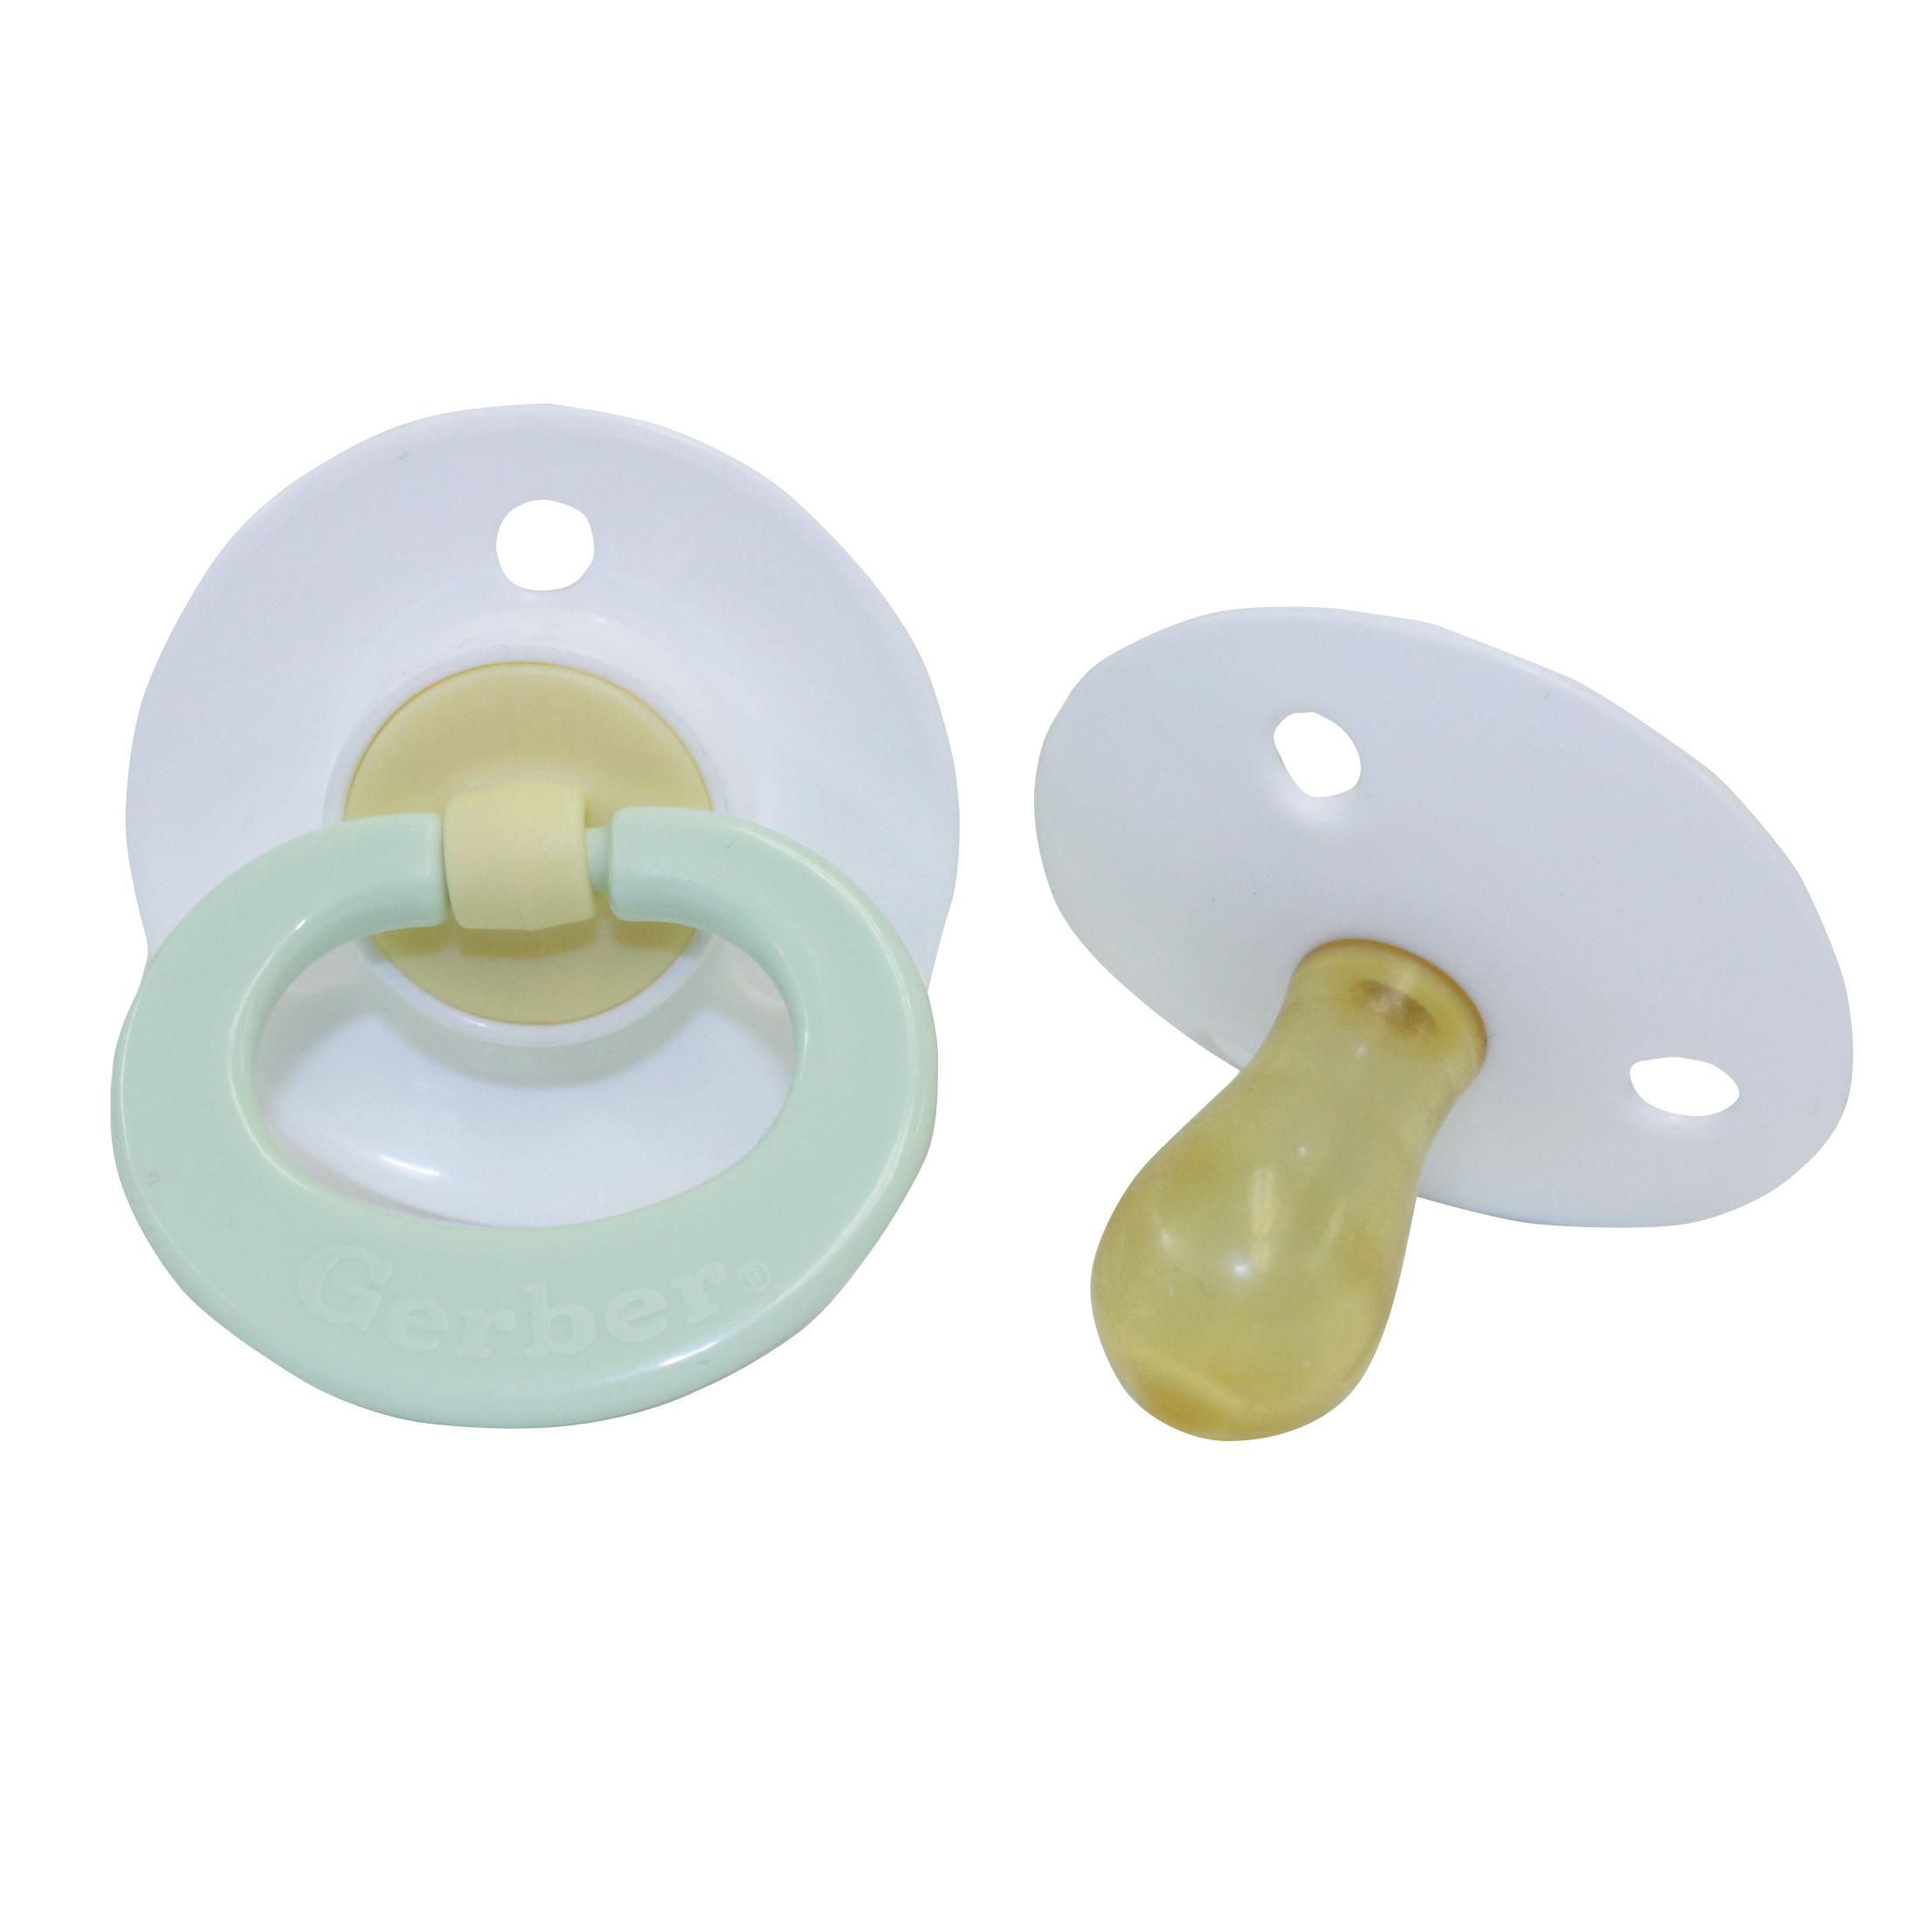 Gerber First Essentials Soft Center Pacifiers, 0-6 Months, 2 Counts - image 2 of 7